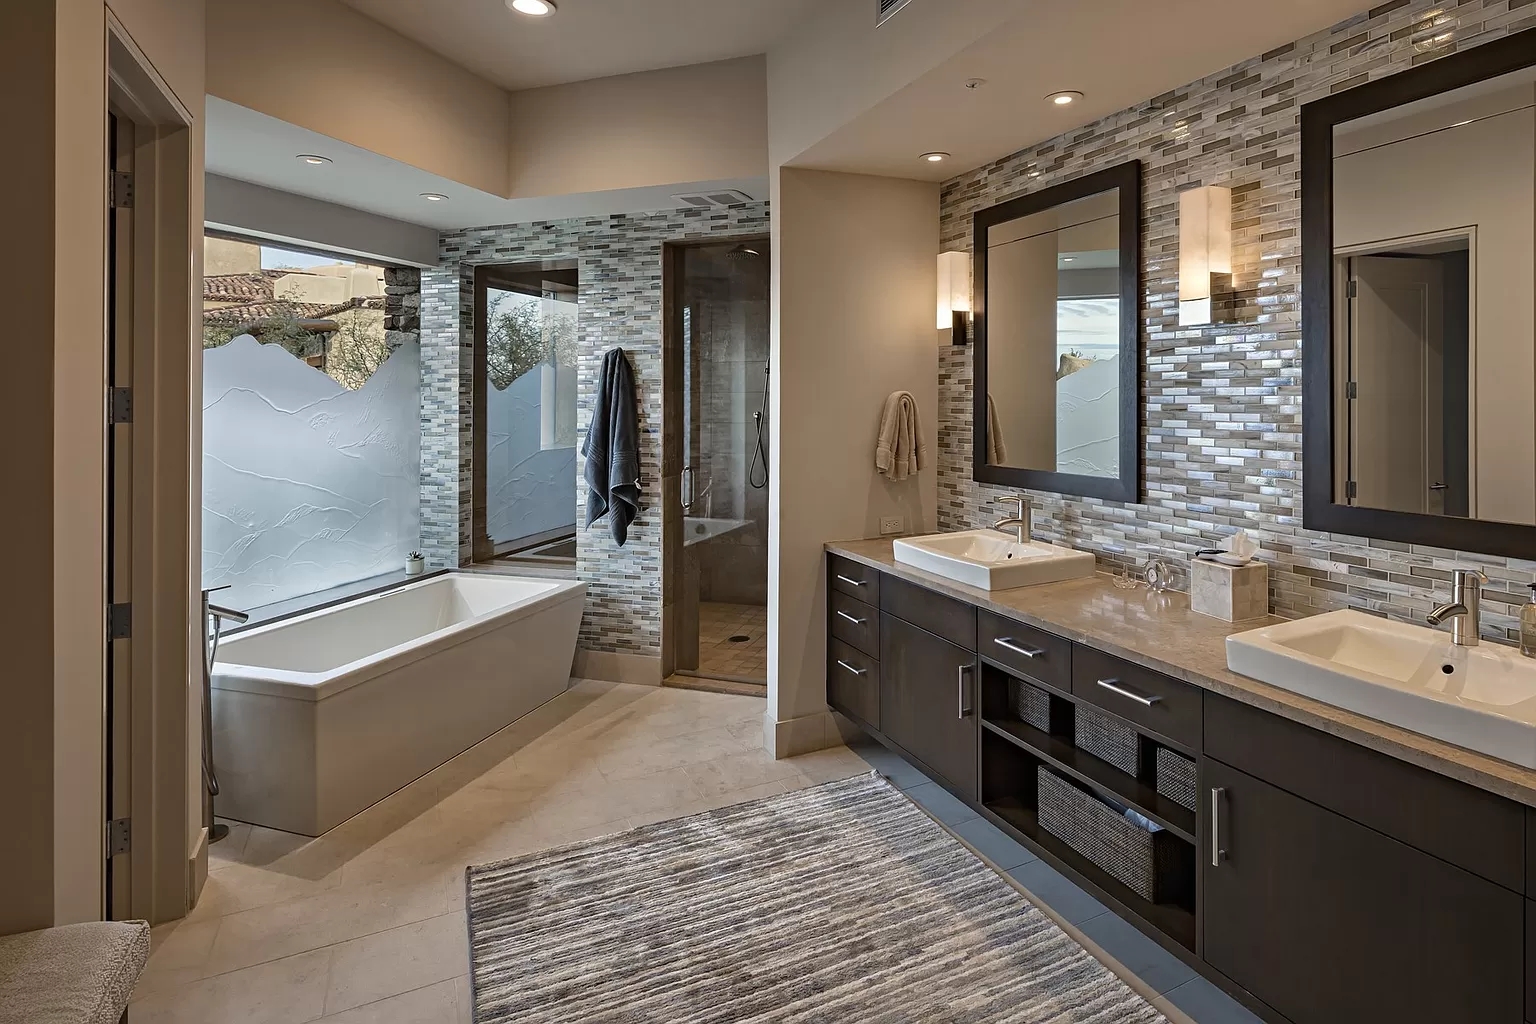 Bathroom Remodel Ideas 2020 | Pictures Designs Layouts